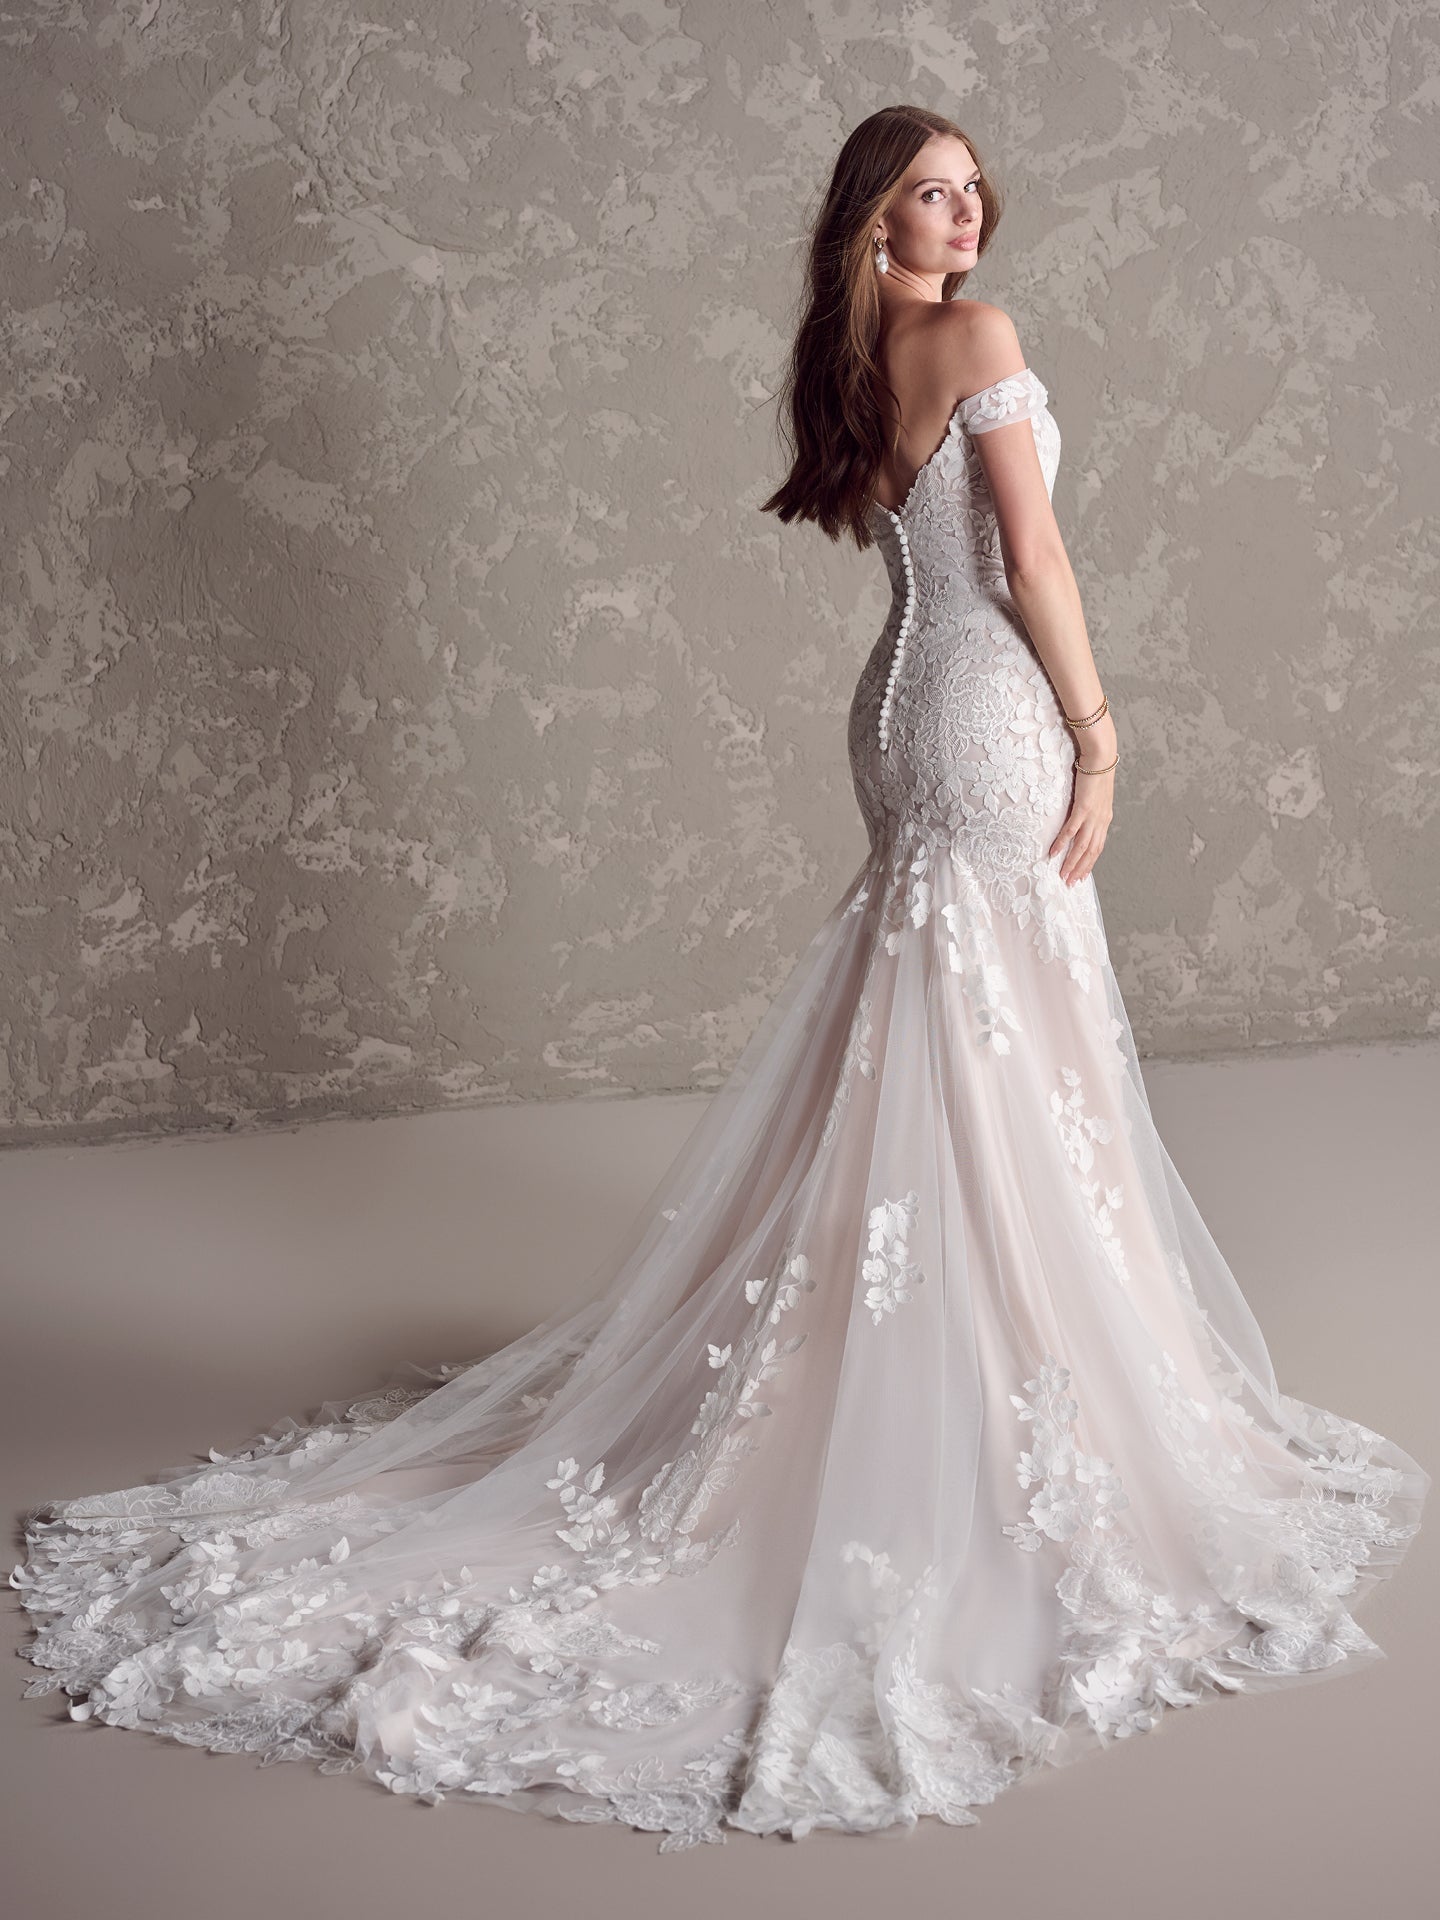 Off-the-Shoulder Floral Fit-and-Flare Gown by Maggie Sottero - Image 2